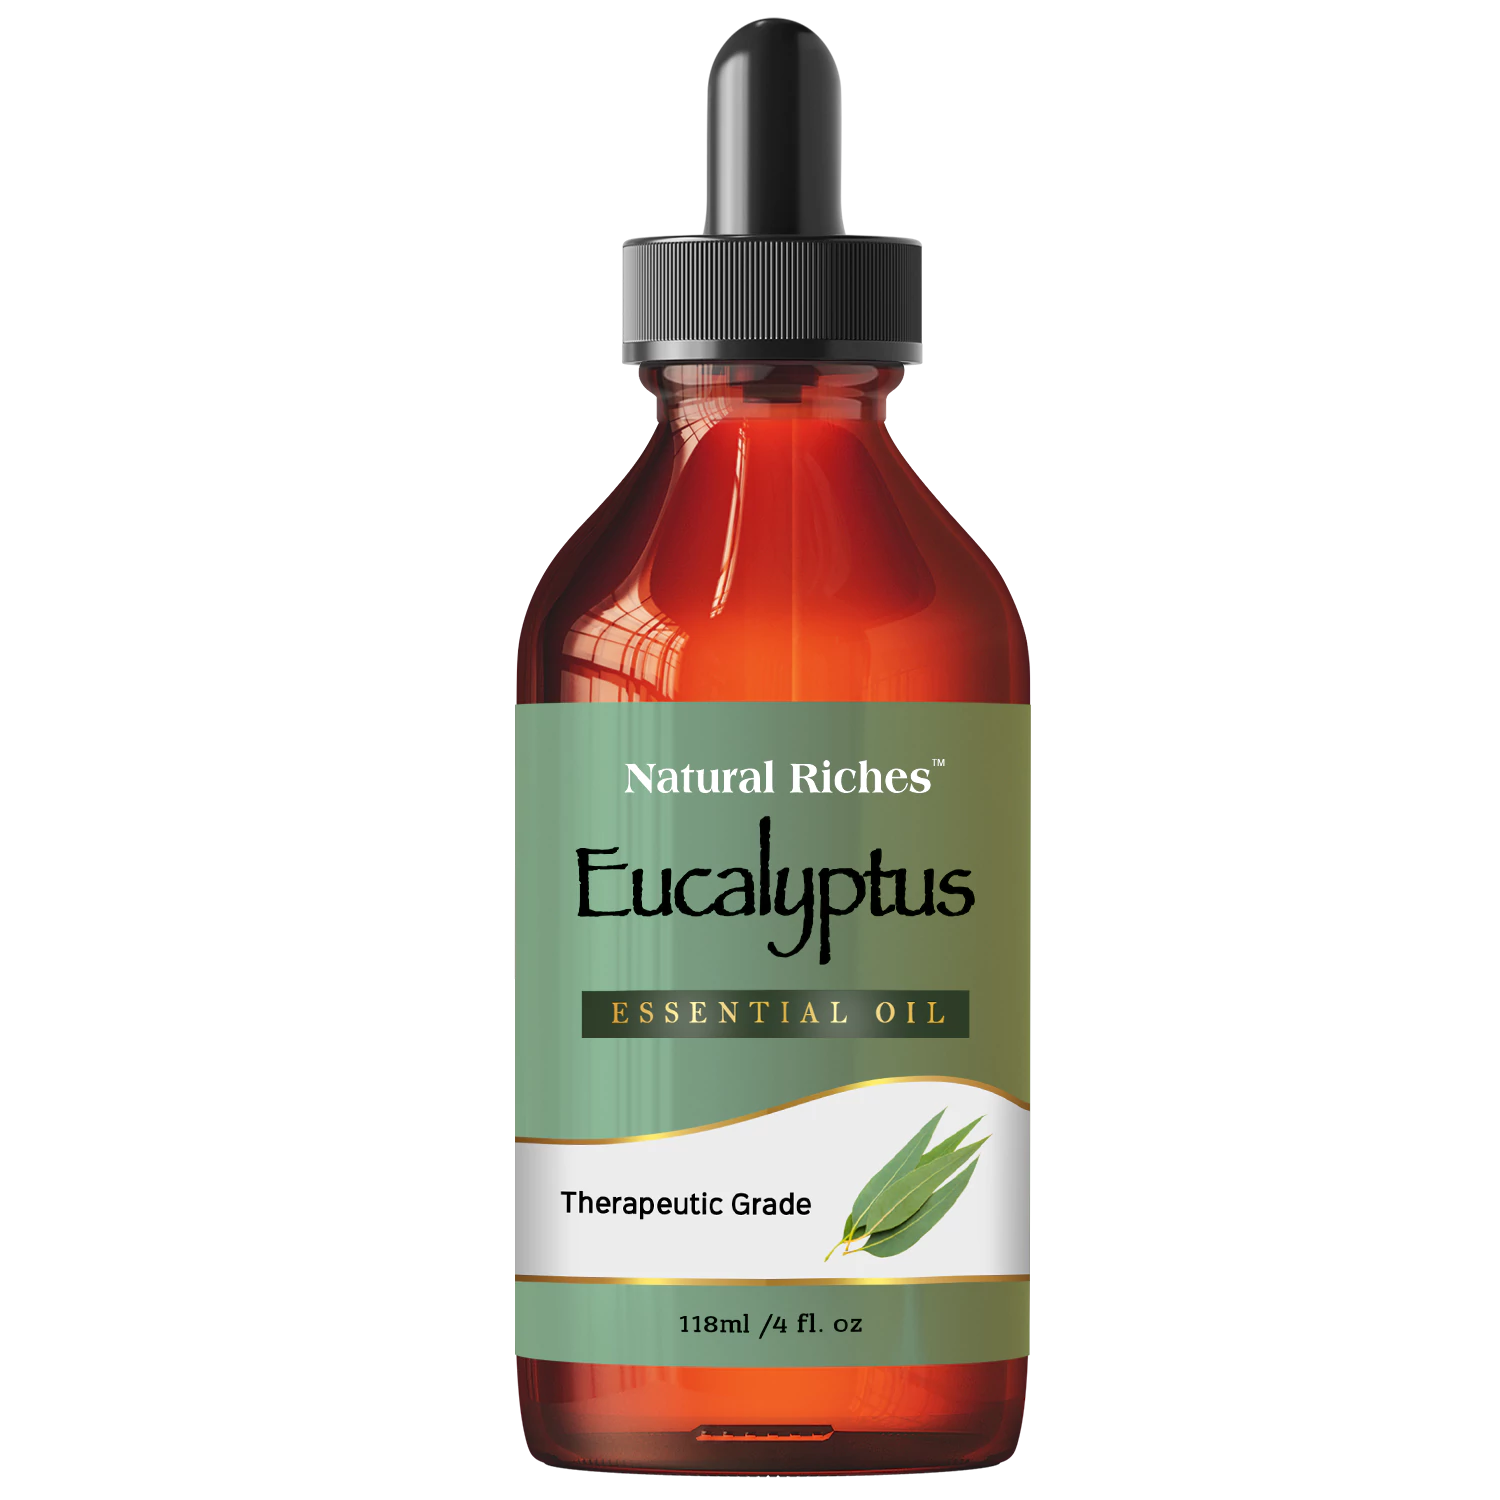 Eucalyptus essential oil by natural riches